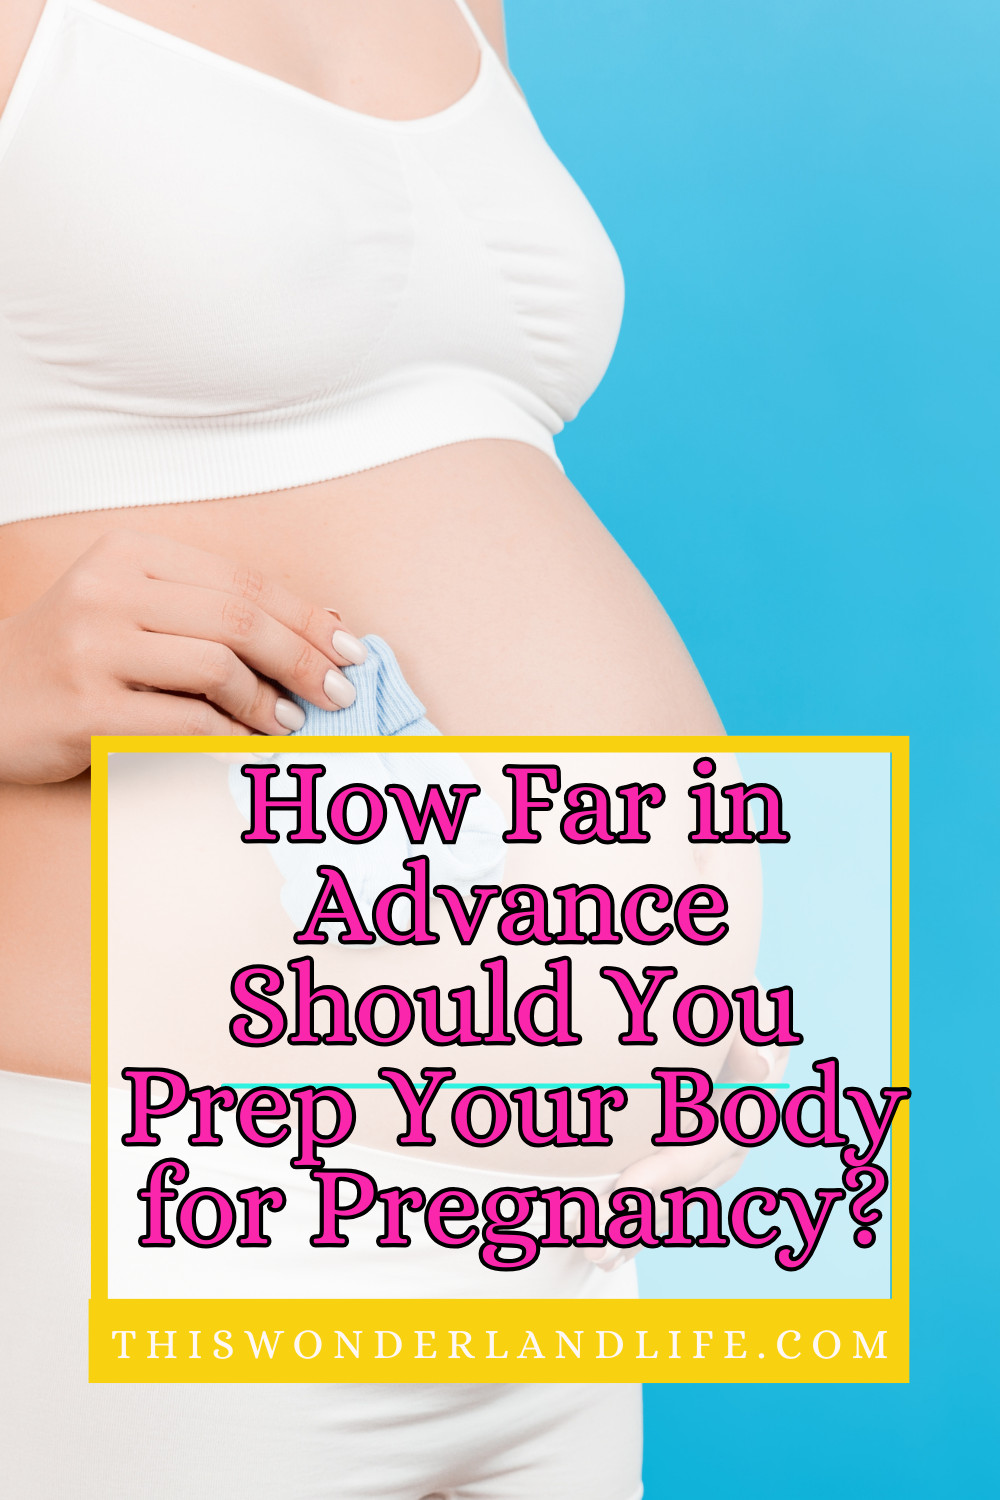 How Far in Advance Should You Prep Your Body for Pregnancy?